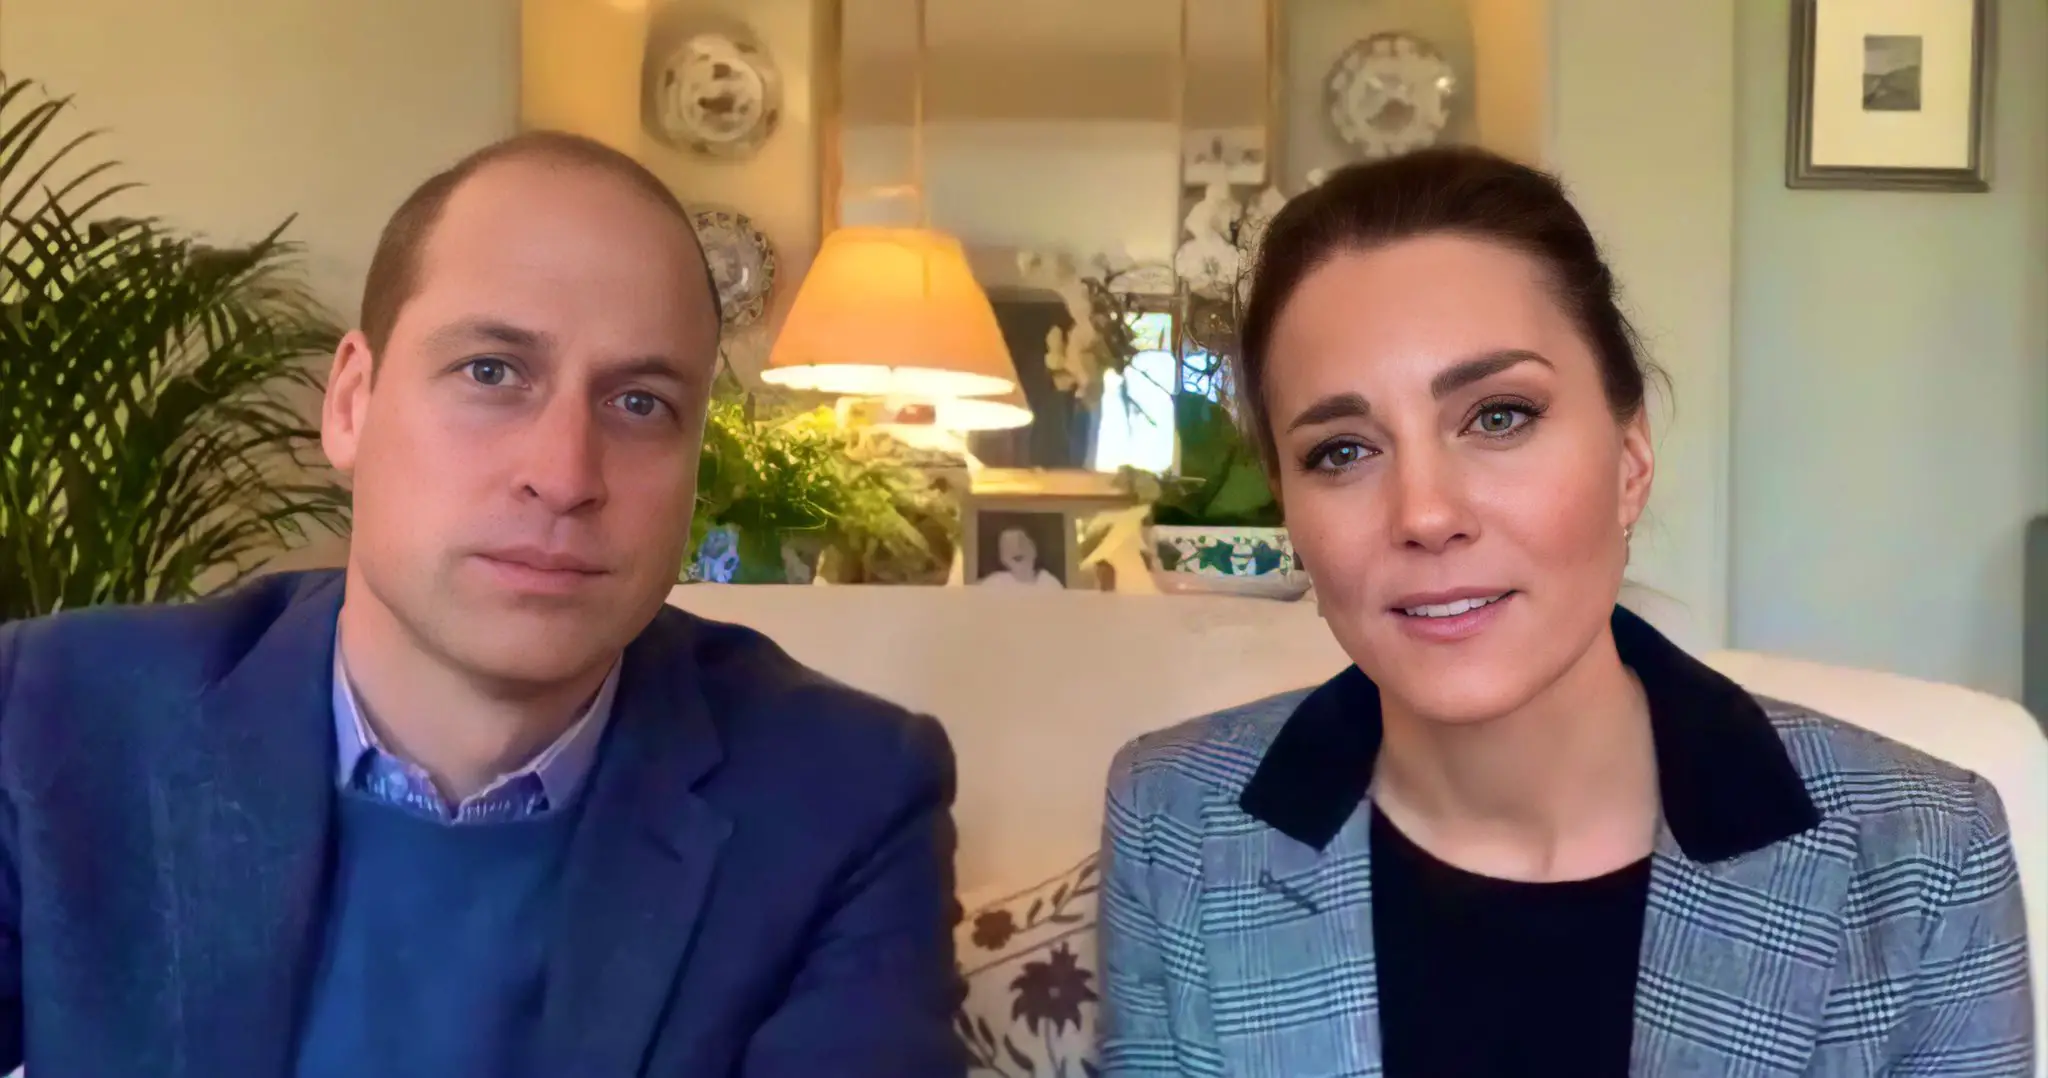 The Duke of Cambridge talked about bereavement during video call